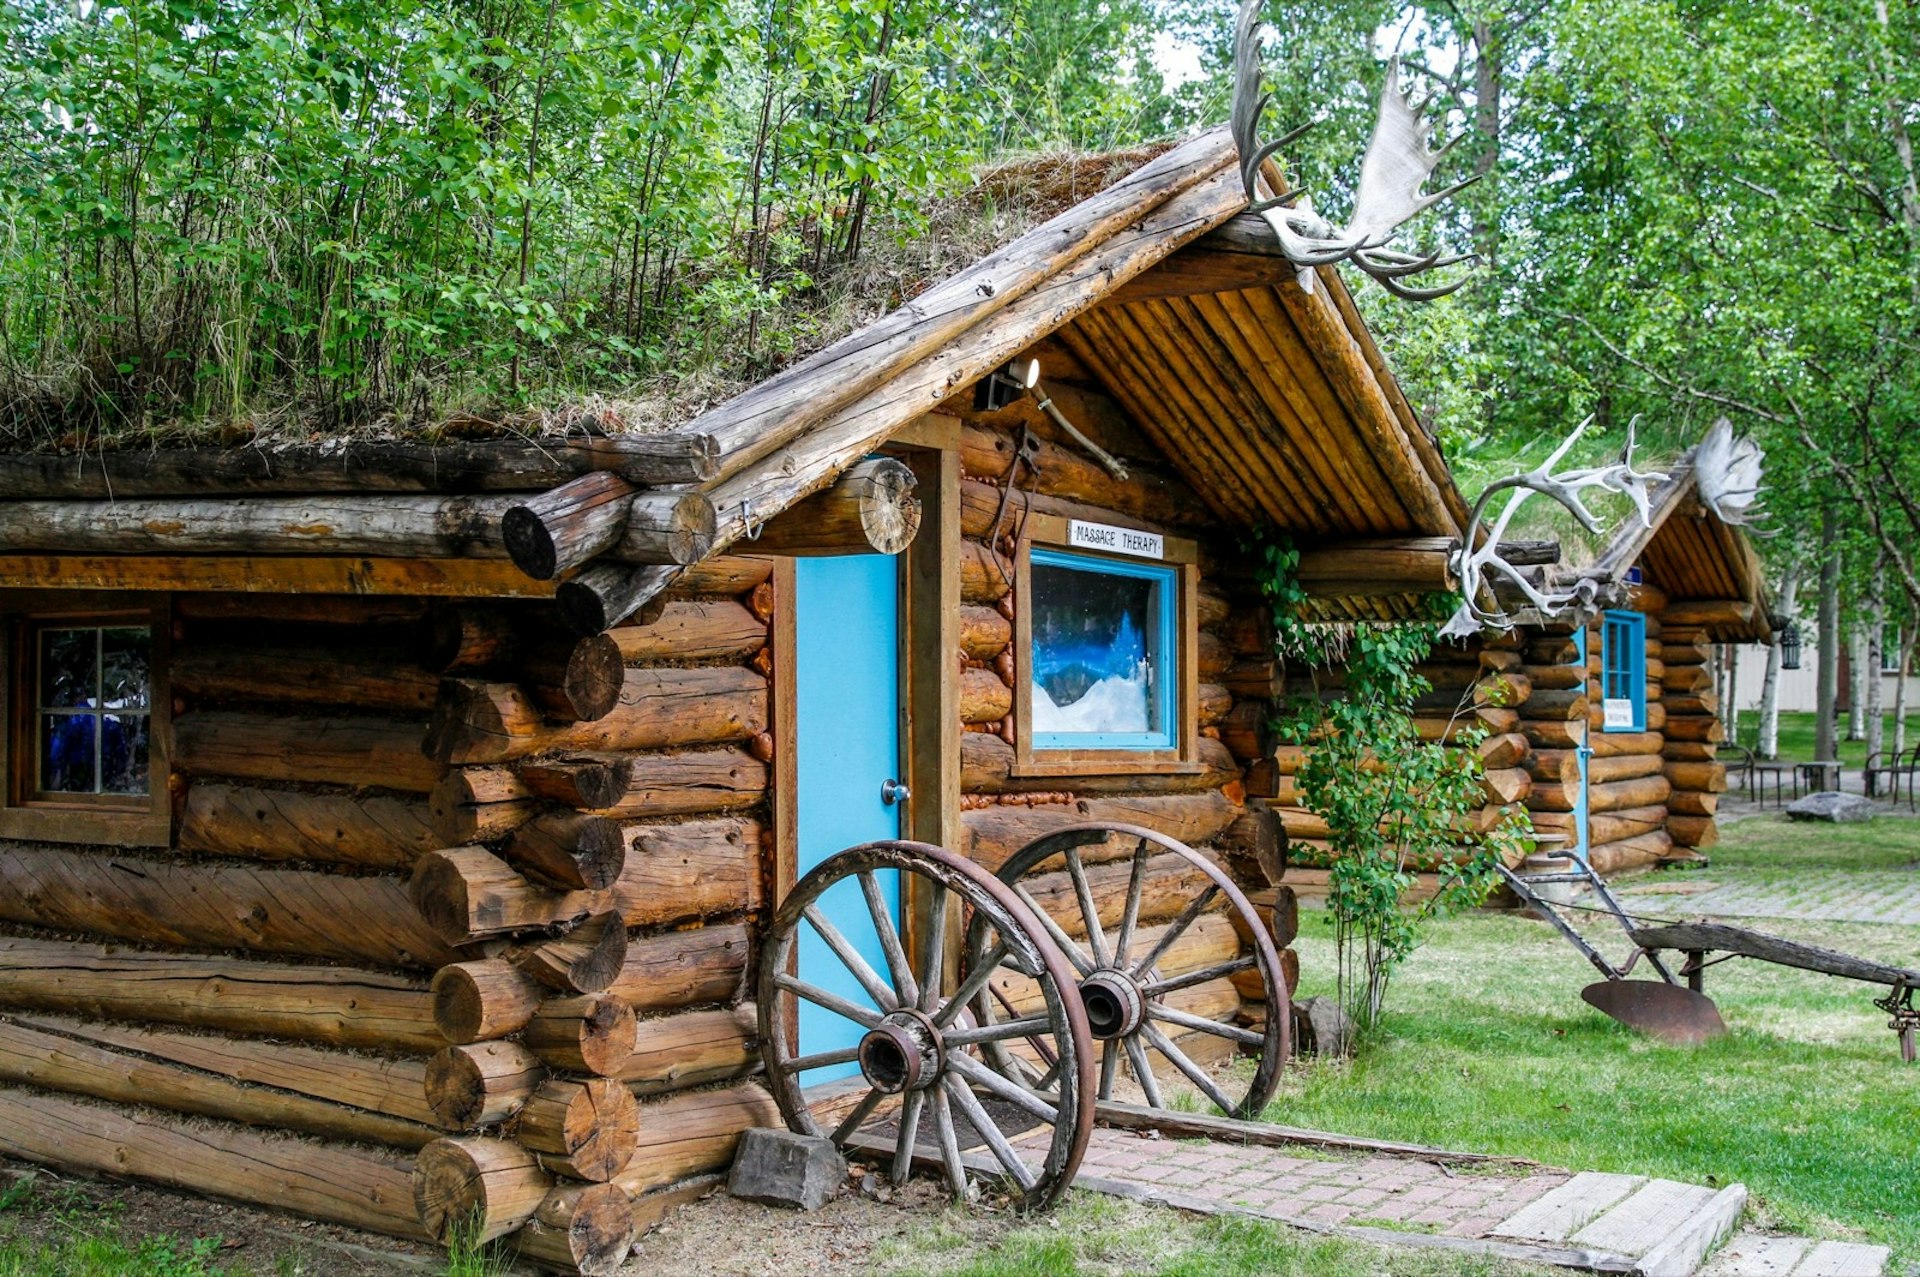 Small log cabins with wagon wheels framing the doors mark the manicured grounds of the Chena Hot Springs resort